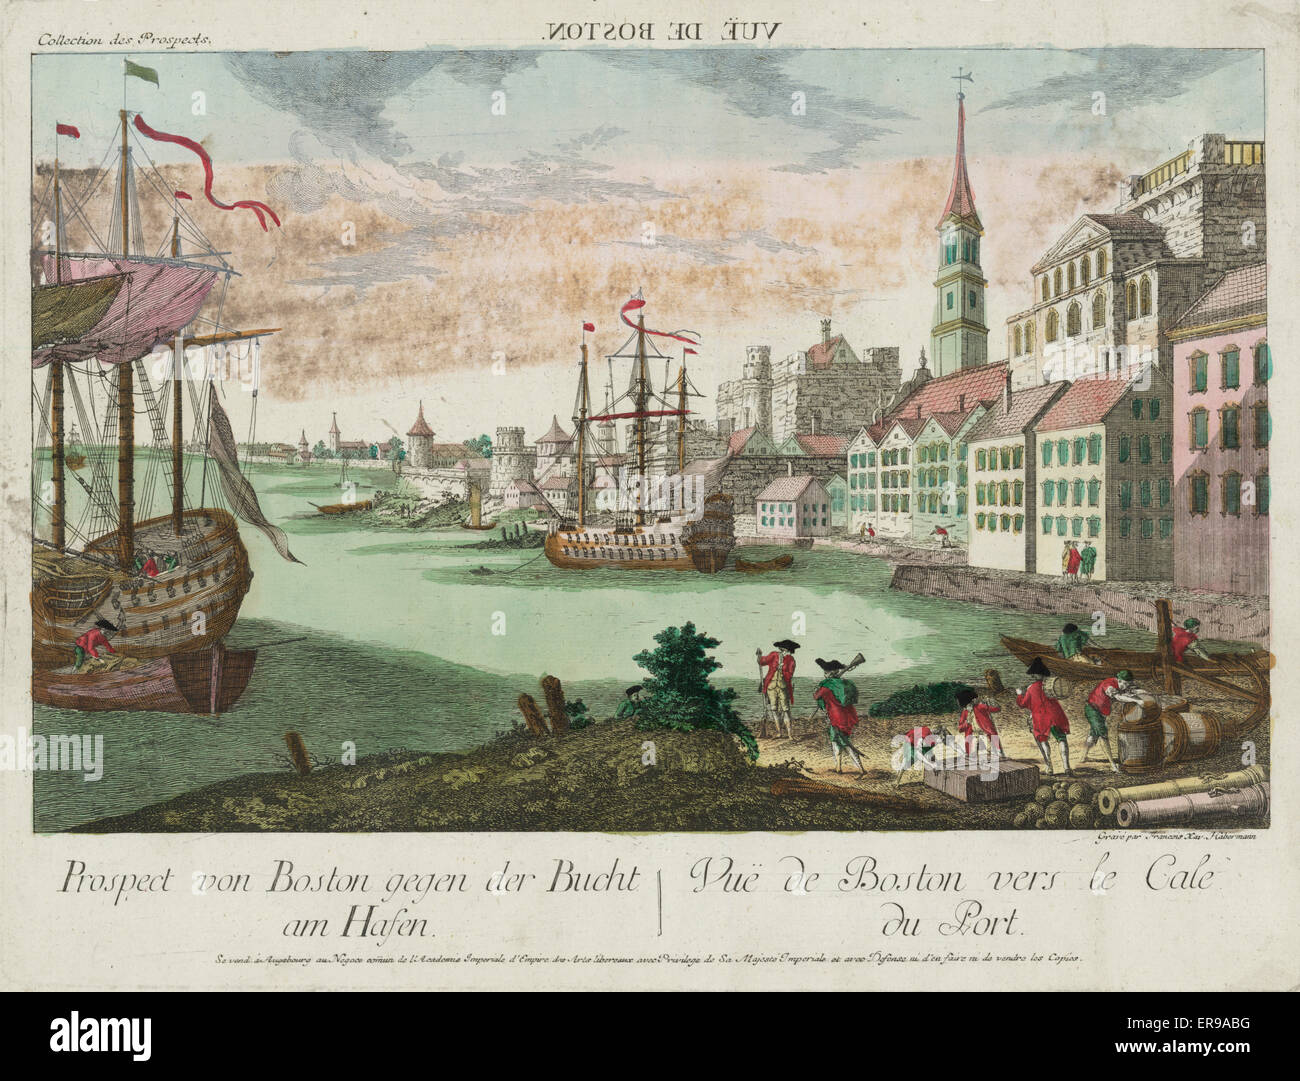 View of Boston. Print shows the harbor in Boston, Massachusetts, two ships at anchor, British soldiers and men working, merchandise on shore; an idealized view depicting Boston as a typical European city. c. 1770s Stock Photo